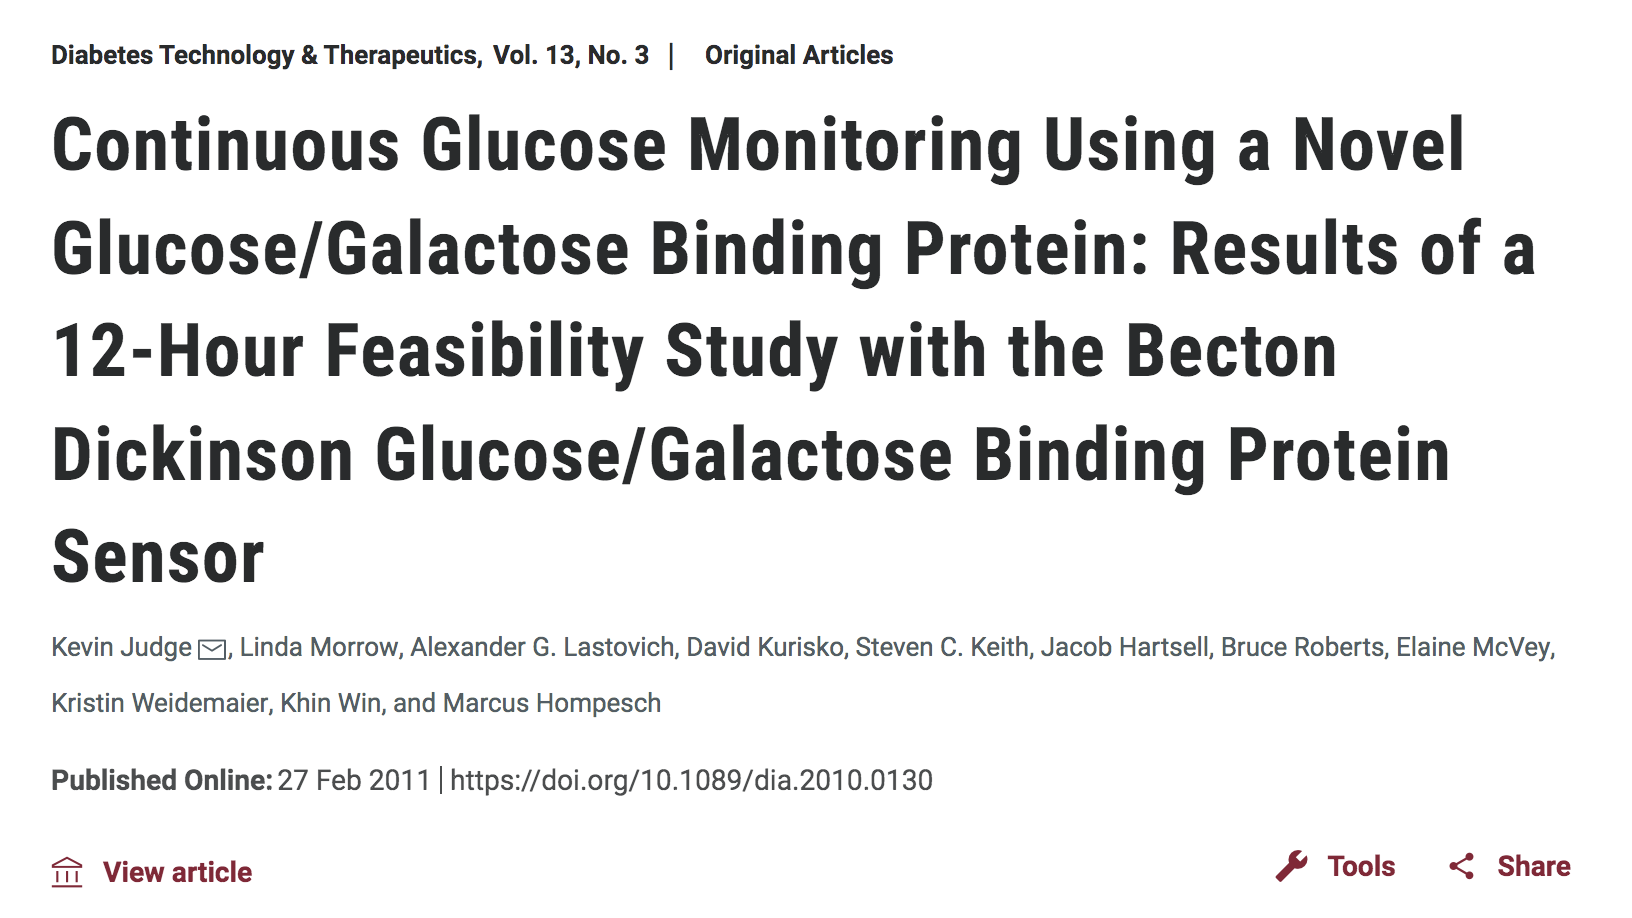 image of Continuous glucose monitoring using a novel glucose/galactose binding protein: results of a 12-hour feasibility study with the becton dickinson glucose/galactose binding protein sensor.